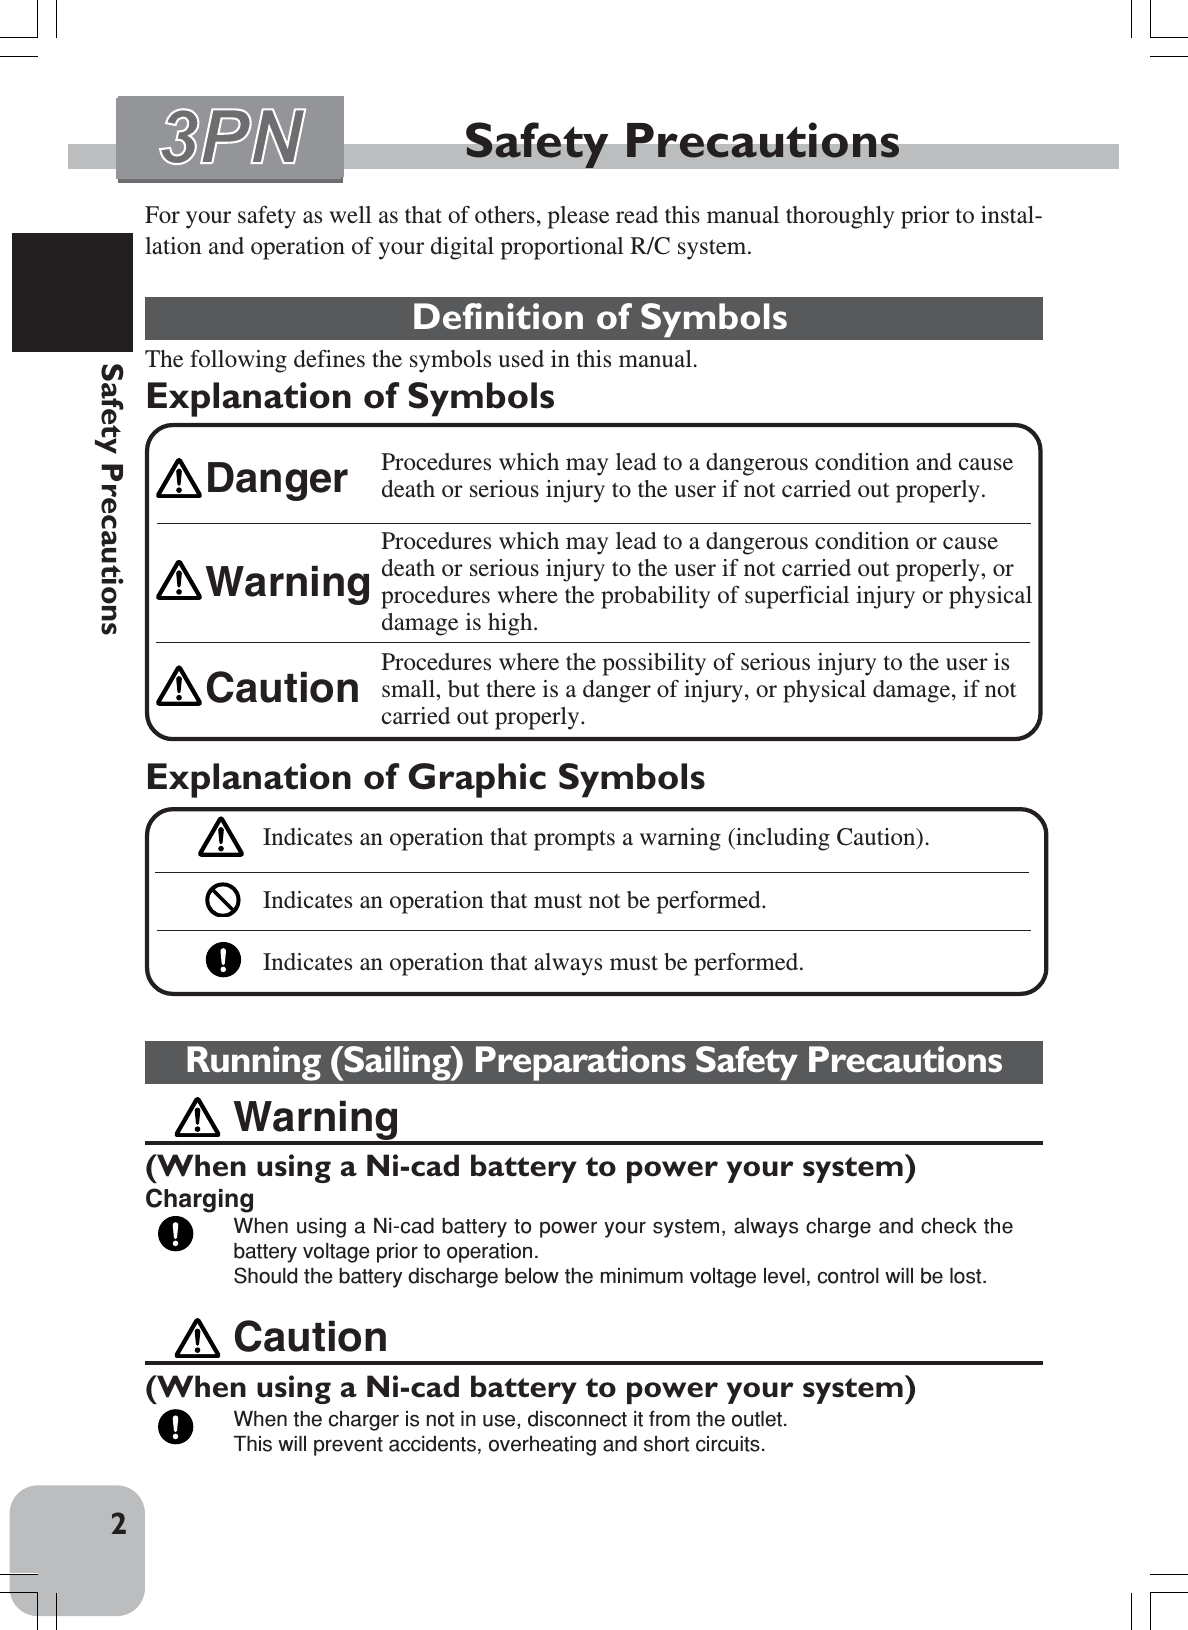 2Safety PrecautionsFor your safety as well as that of others, please read this manual thoroughly prior to instal-lation and operation of your digital proportional R/C system.Definition of SymbolsThe following defines the symbols used in this manual.Explanation of SymbolsSafety PrecautionsCaution(When using a Ni-cad battery to power your system)When the charger is not in use, disconnect it from the outlet.This will prevent accidents, overheating and short circuits.Running (Sailing) Preparations Safety PrecautionsWarning(When using a Ni-cad battery to power your system)ChargingWhen using a Ni-cad battery to power your system, always charge and check thebattery voltage prior to operation.Should the battery discharge below the minimum voltage level, control will be lost.Explanation of Graphic SymbolsIndicates an operation that prompts a warning (including Caution).Indicates an operation that must not be performed.Indicates an operation that always must be performed.Procedures which may lead to a dangerous condition and causedeath or serious injury to the user if not carried out properly.Procedures which may lead to a dangerous condition or causedeath or serious injury to the user if not carried out properly, orprocedures where the probability of superficial injury or physicaldamage is high.Procedures where the possibility of serious injury to the user issmall, but there is a danger of injury, or physical damage, if notcarried out properly.WarningCautionDanger